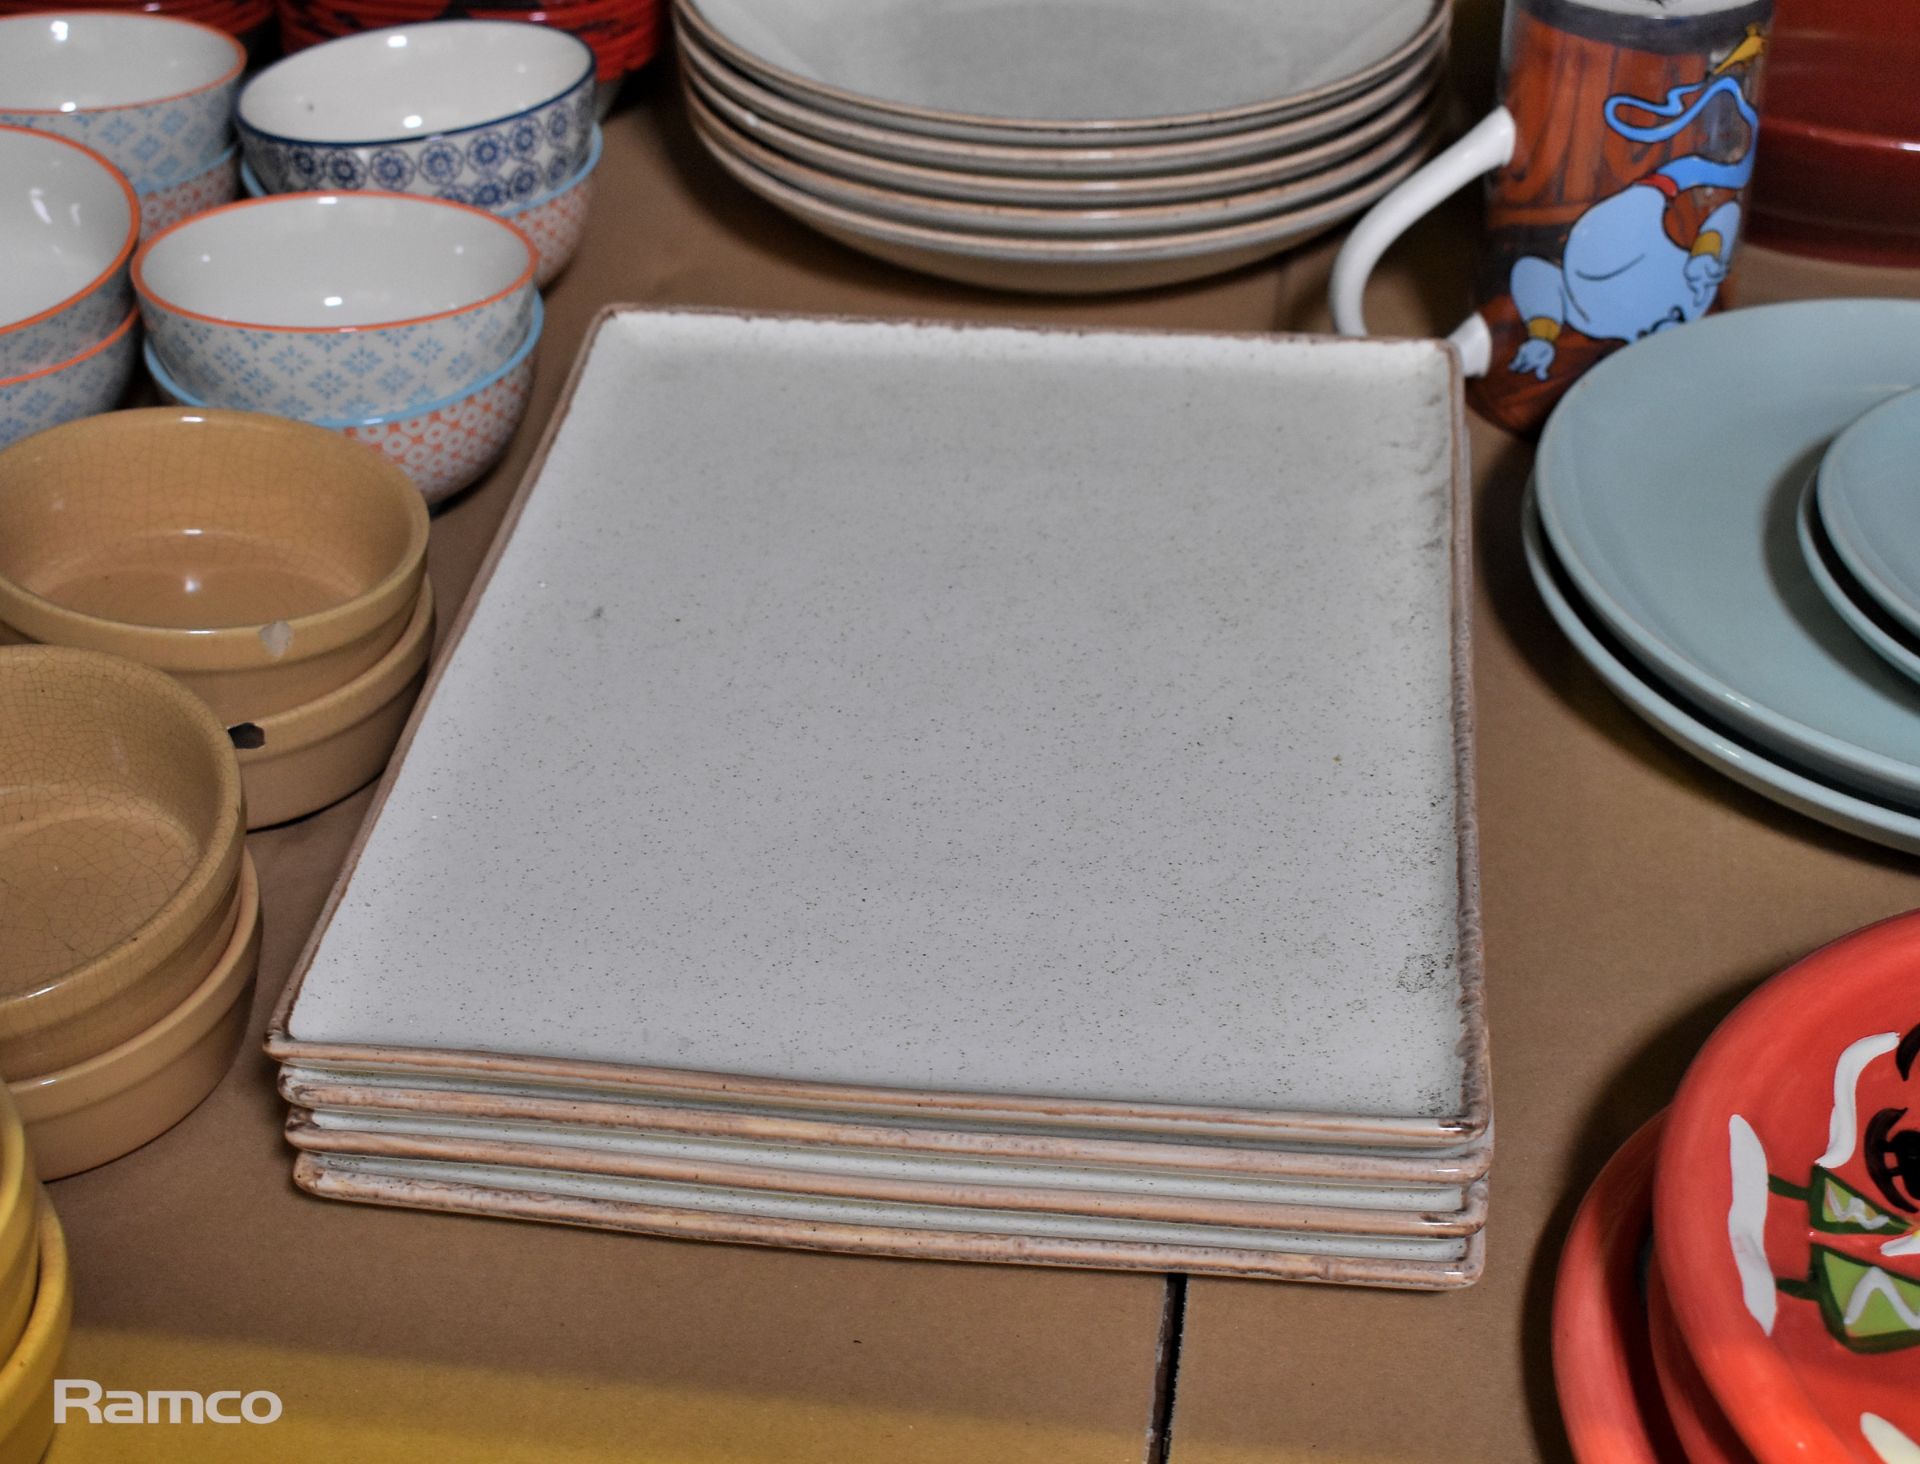 Catering plates, bowls, dishes of multiple styles - Image 3 of 6